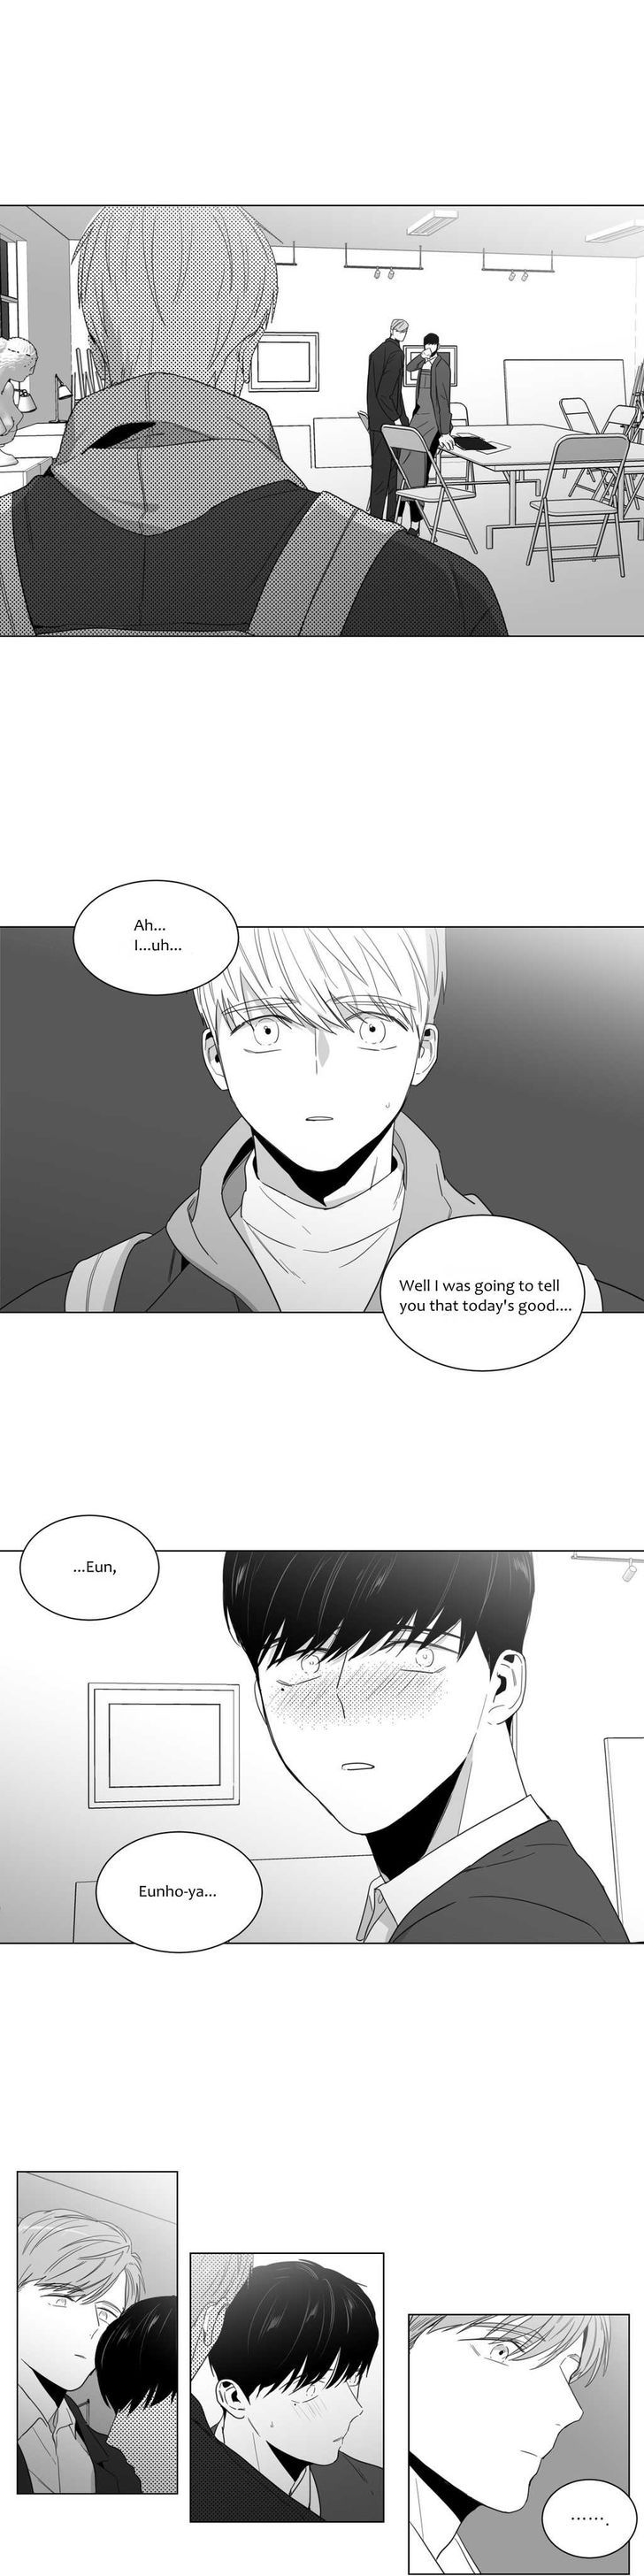 Lover Boy (Lezhin) Chapter 011 page 2